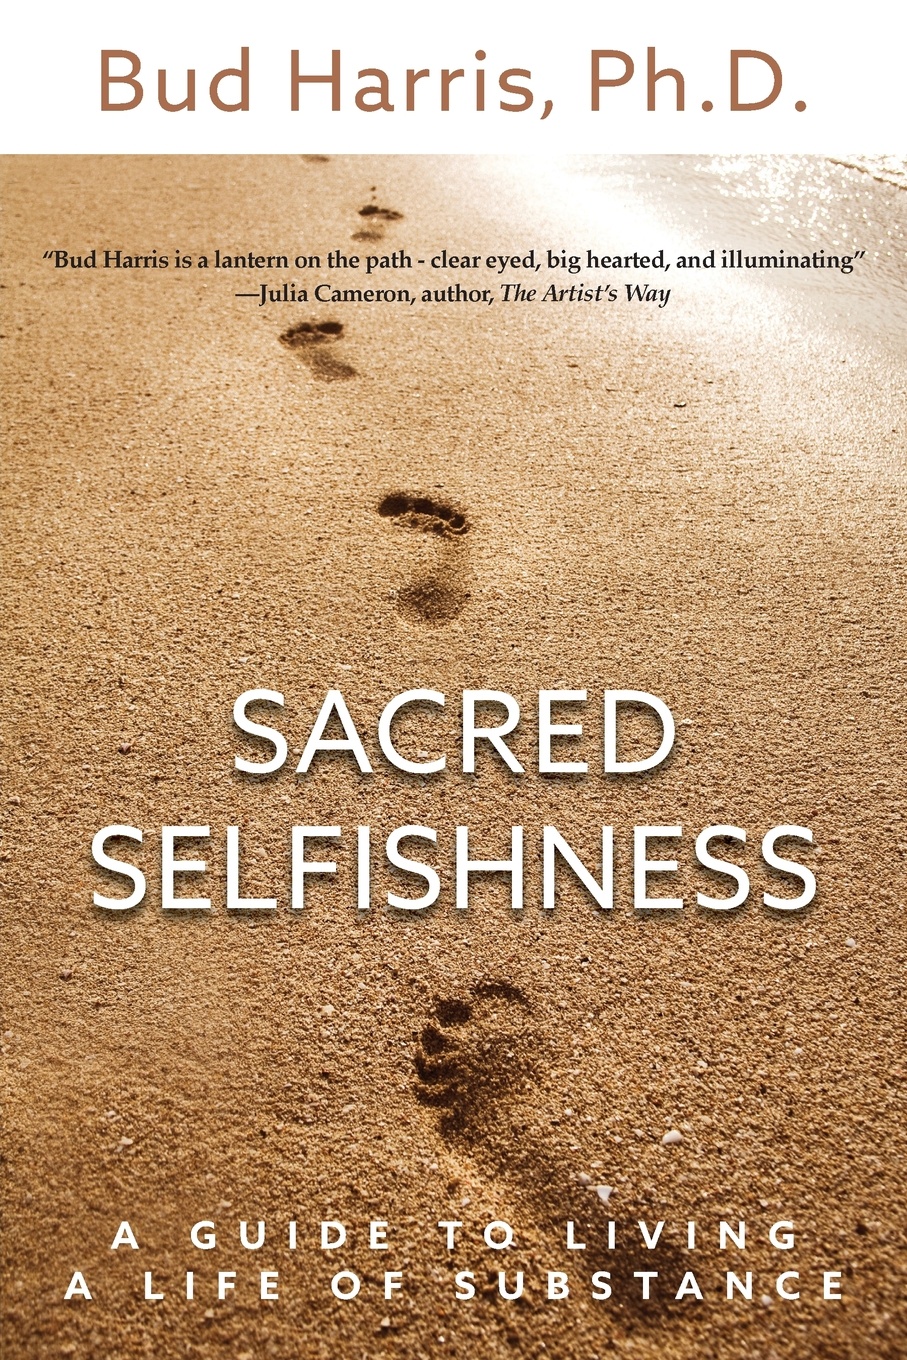 Sacred Selfishness. A Guide to Living a Life of Substance